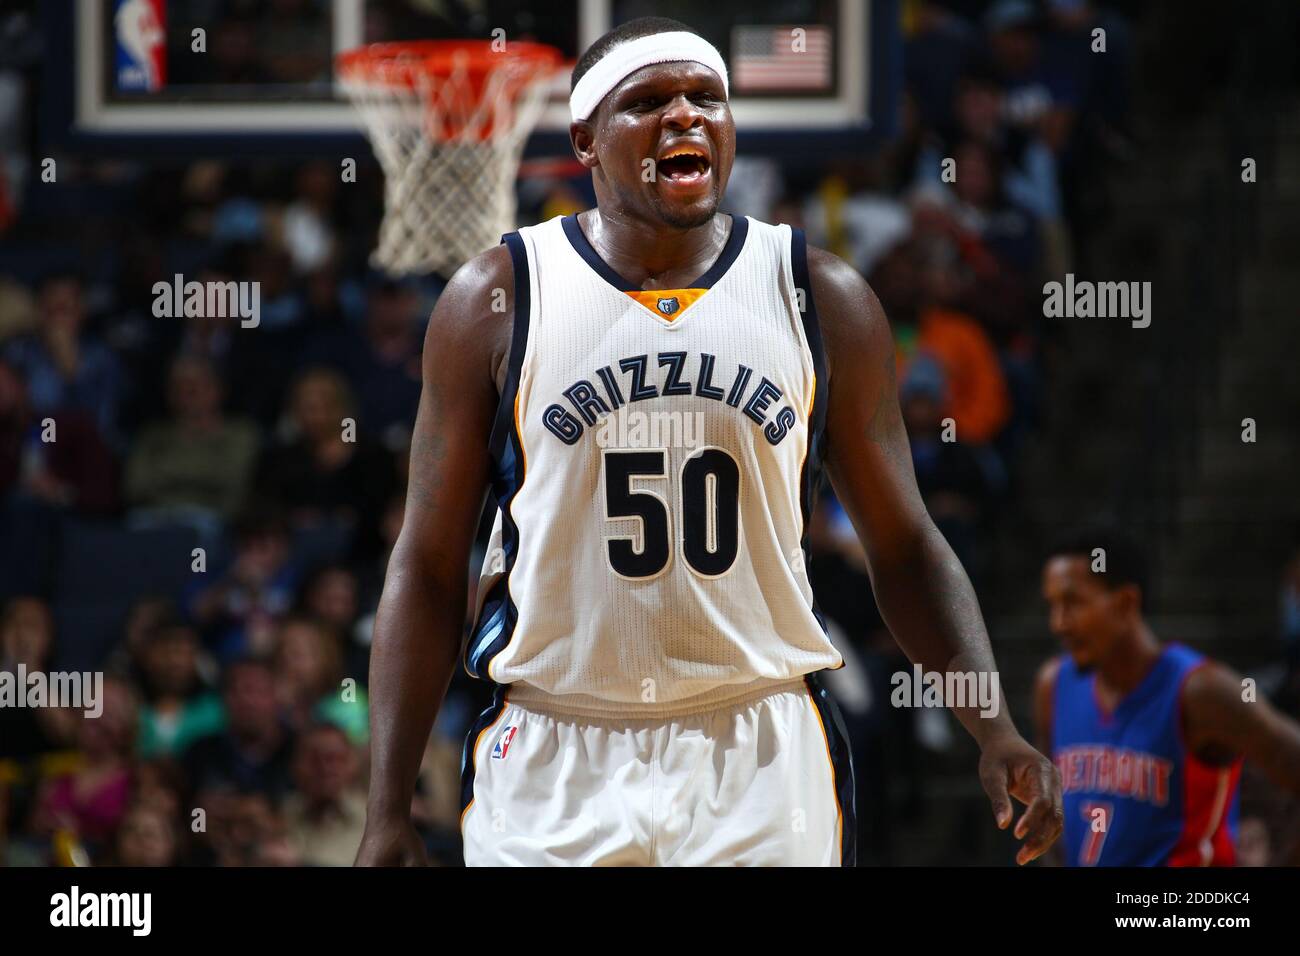 NO FILM, NO VIDEO, NO TV, NO DOCUMENTARY - The Memphis Grizzlies' Zach Randolph during action against the Detroit Pistons at the FedExForum in Memphis, TN, USA on November 15, 2014. Photo by Nikki Boertman/The Commercial Appeal/MCT/ABACAPRESS.COM Stock Photo